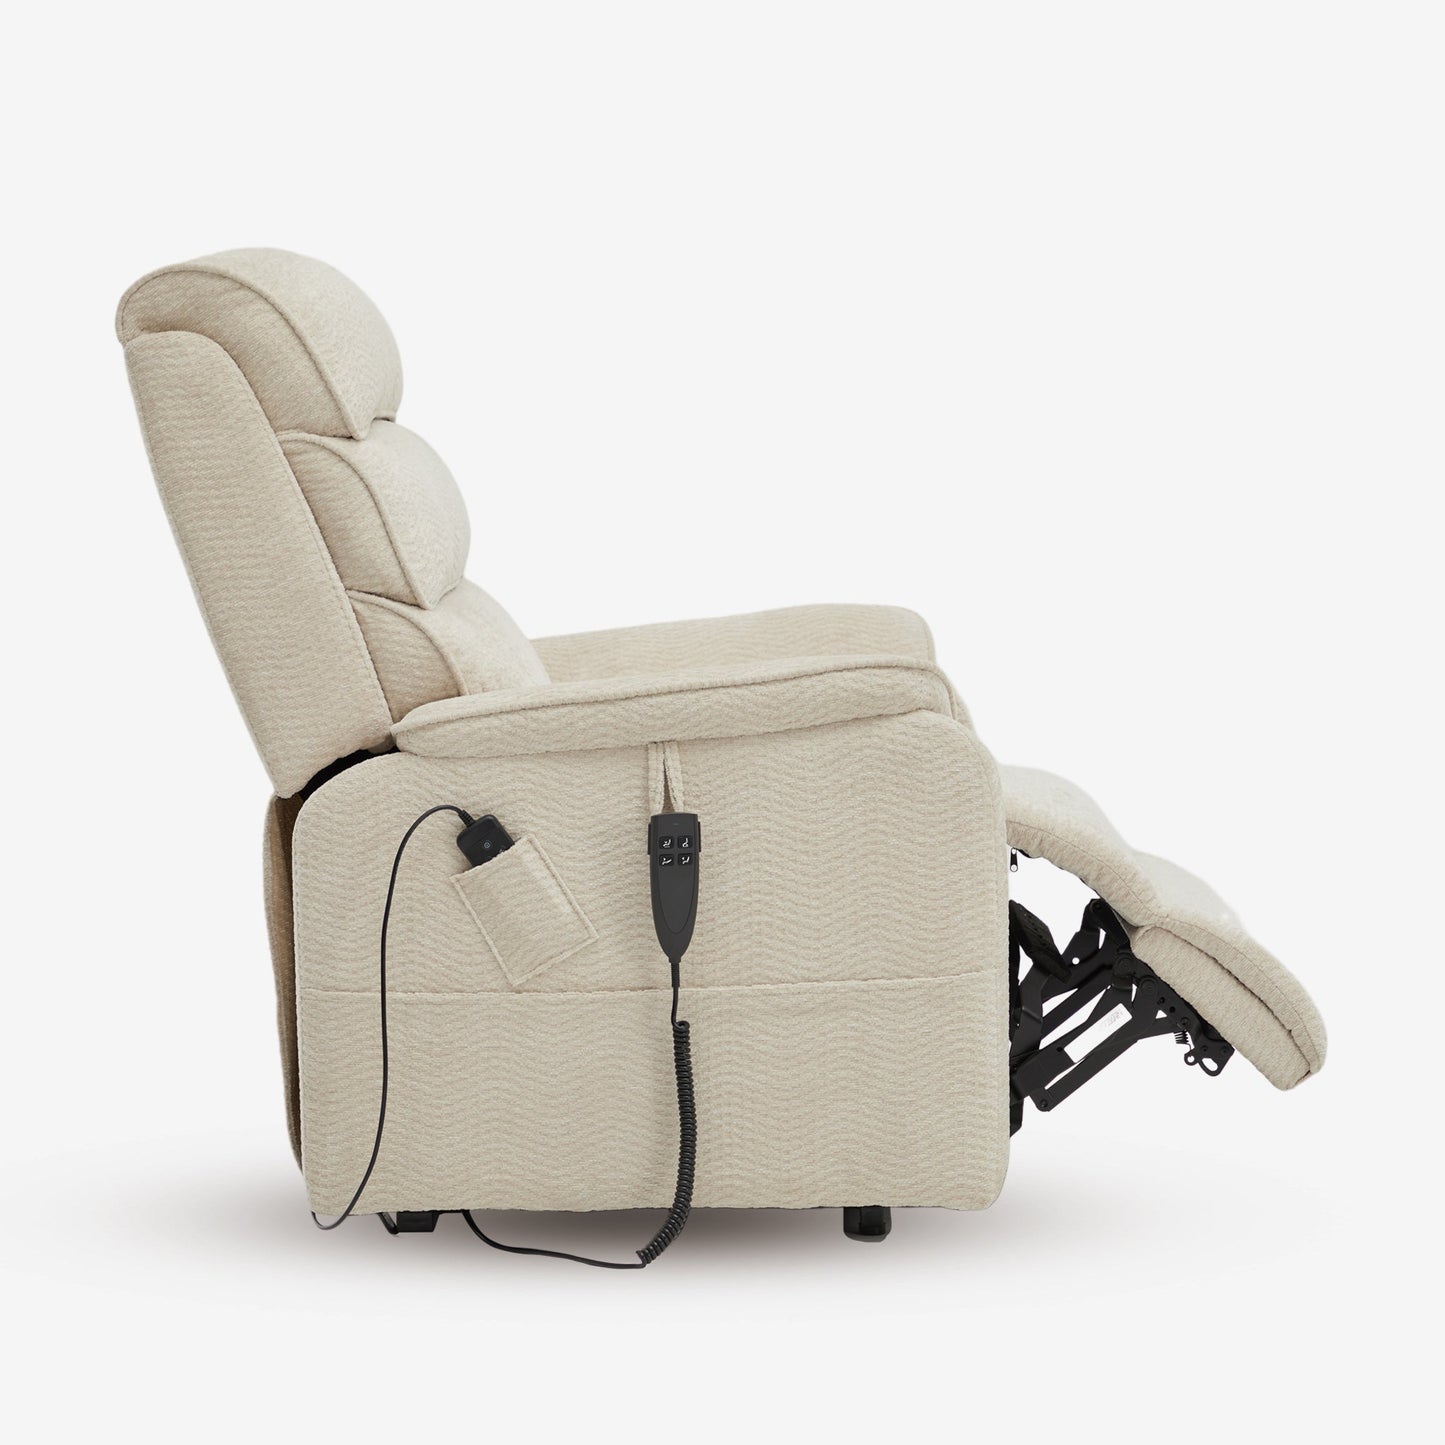 Lift And Recline Chairs With Heat&Massage And Infinite Positions